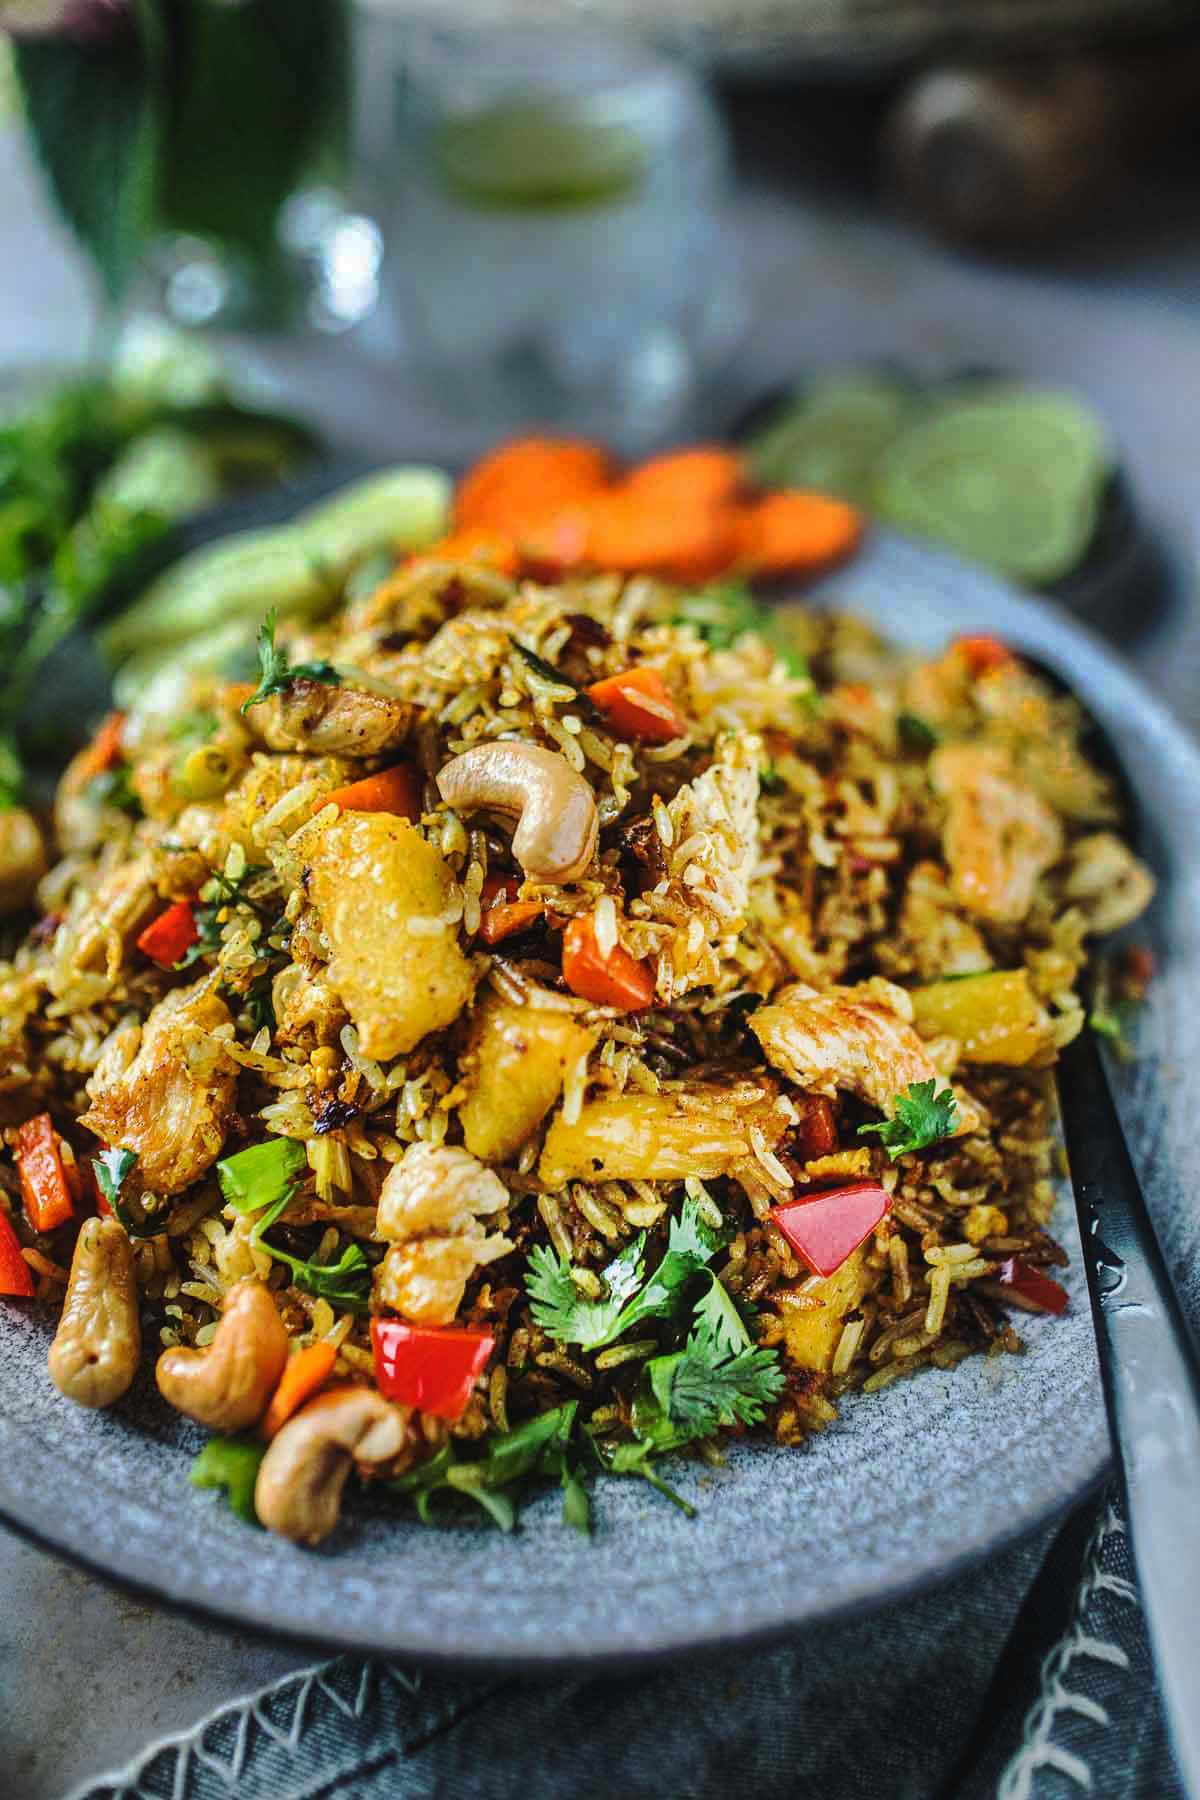 This pineapple fried rice is easy to make in 30 minutes with your choice of chicken, shrimp, or crunchy tofu.  A delicious Thai meal in minutes!